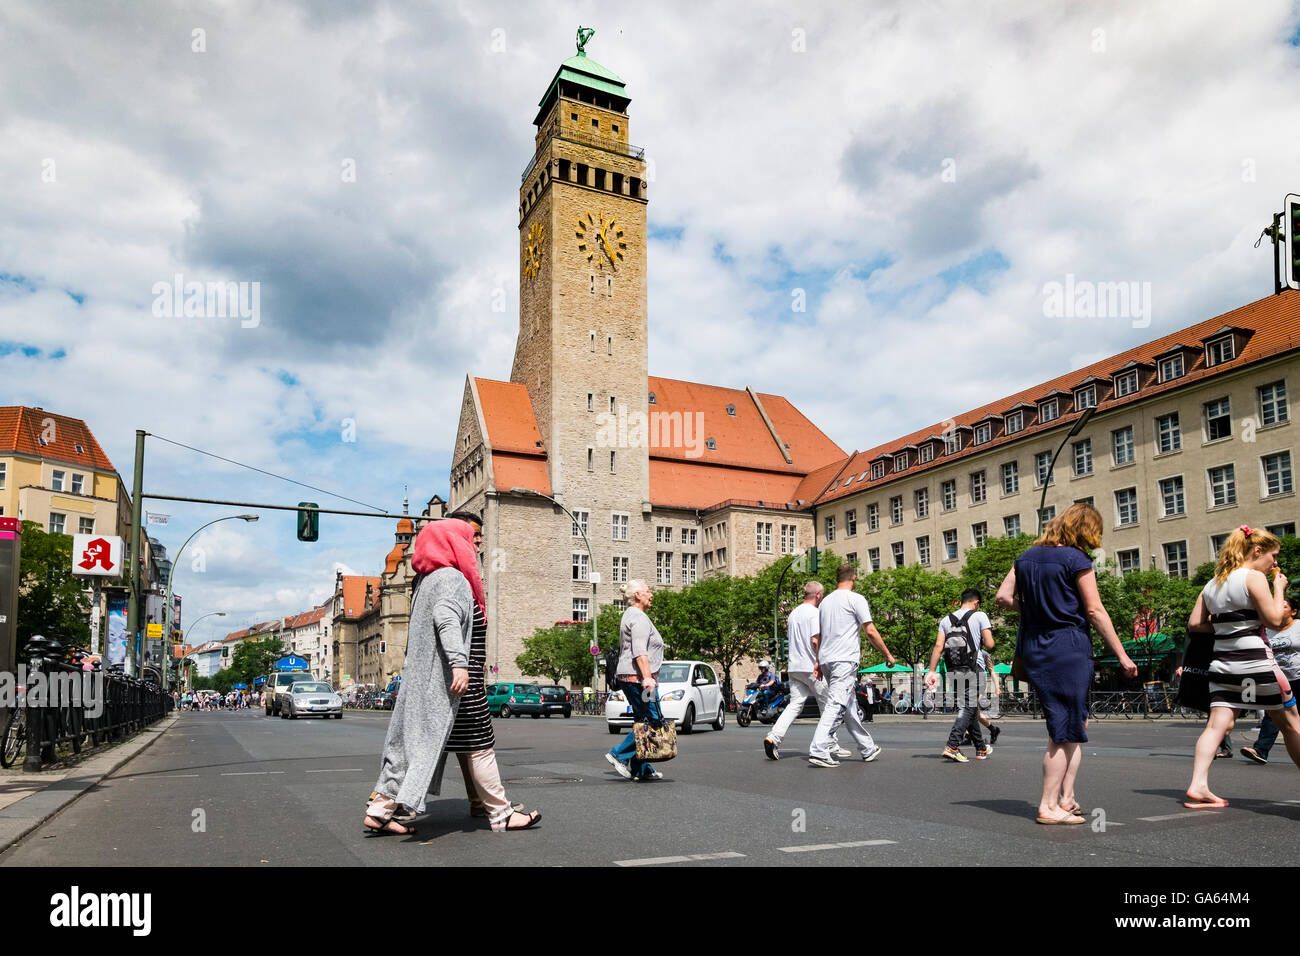 View along Karl Marx Strasse towards Rathaus or town hall in Neukolln district in Berlin Germany Stock Photo